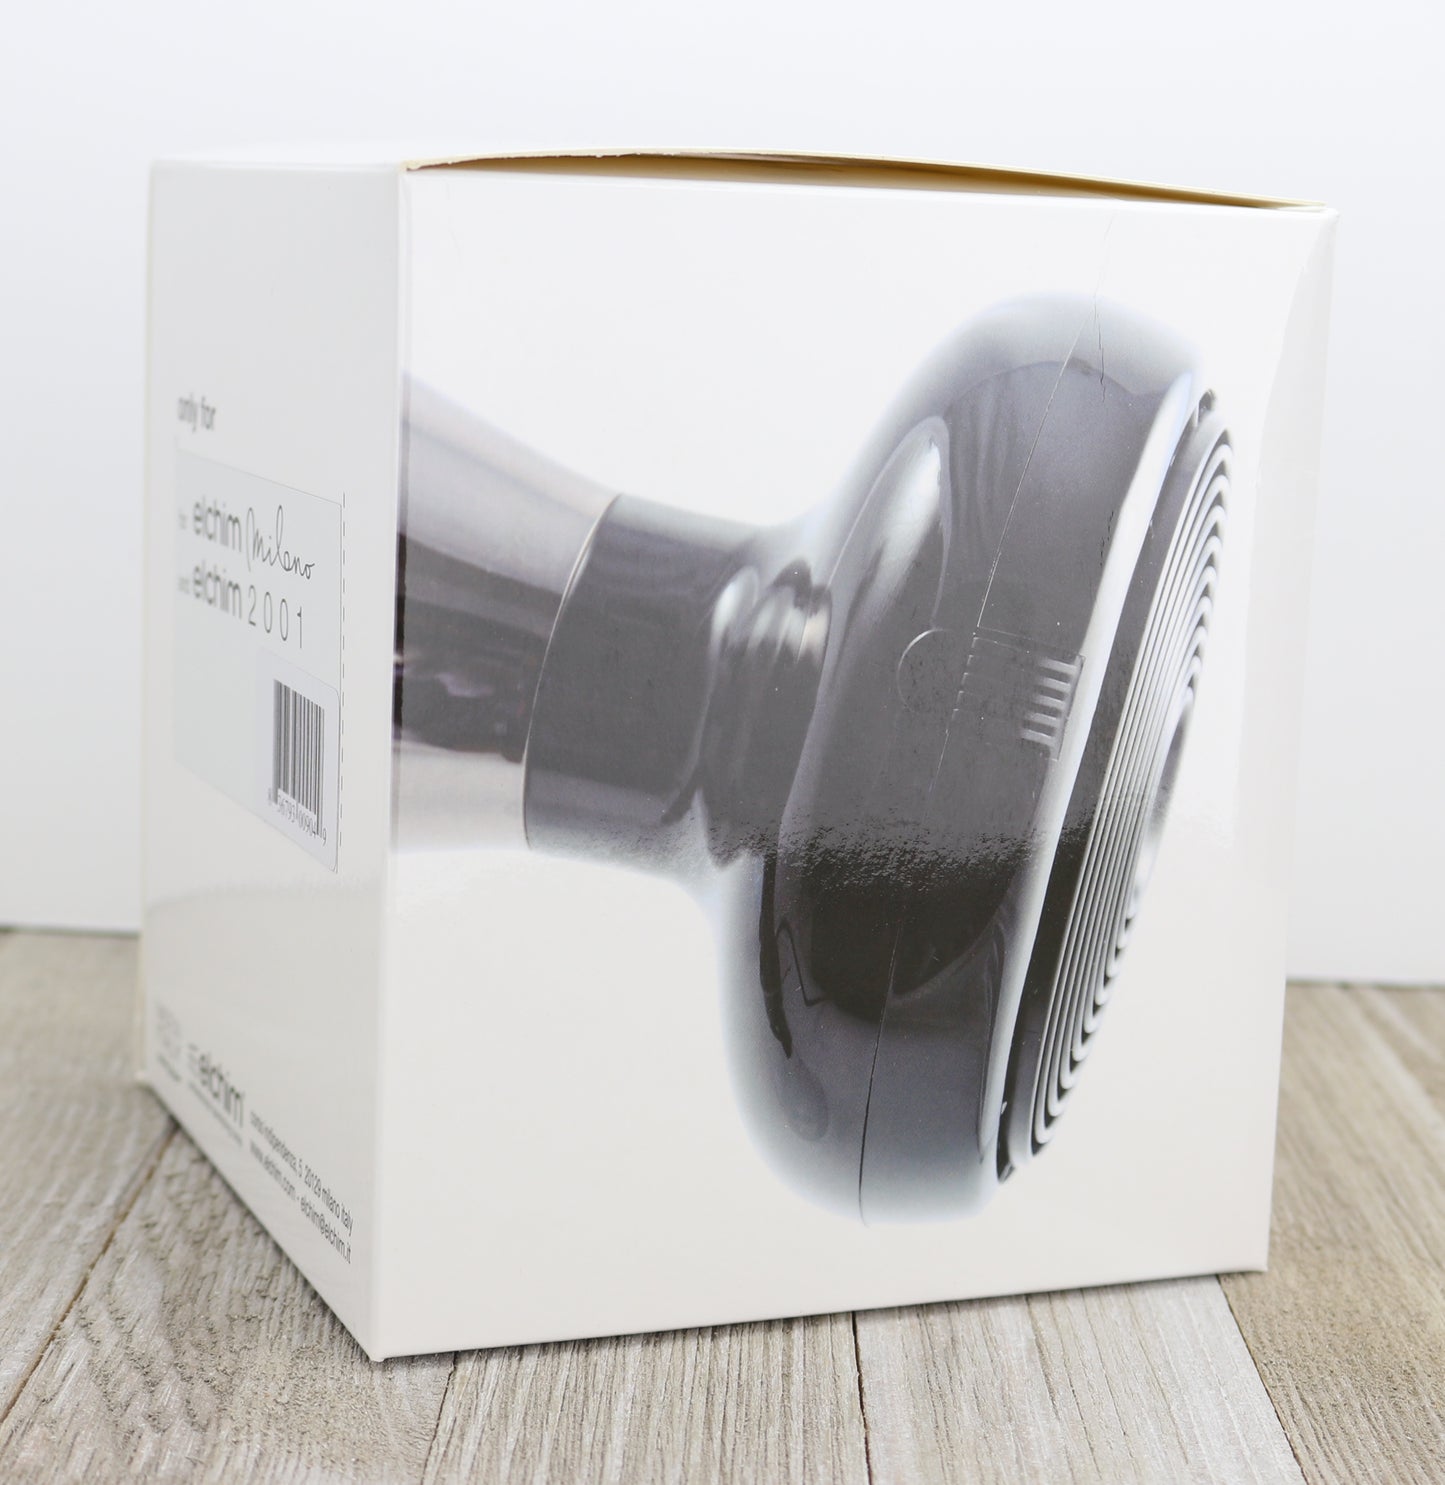 Elchim Cocoon Hair Dryer diffuser. 2 in 1 Professional Diffuser for Milano and 2001 Model Dryers.